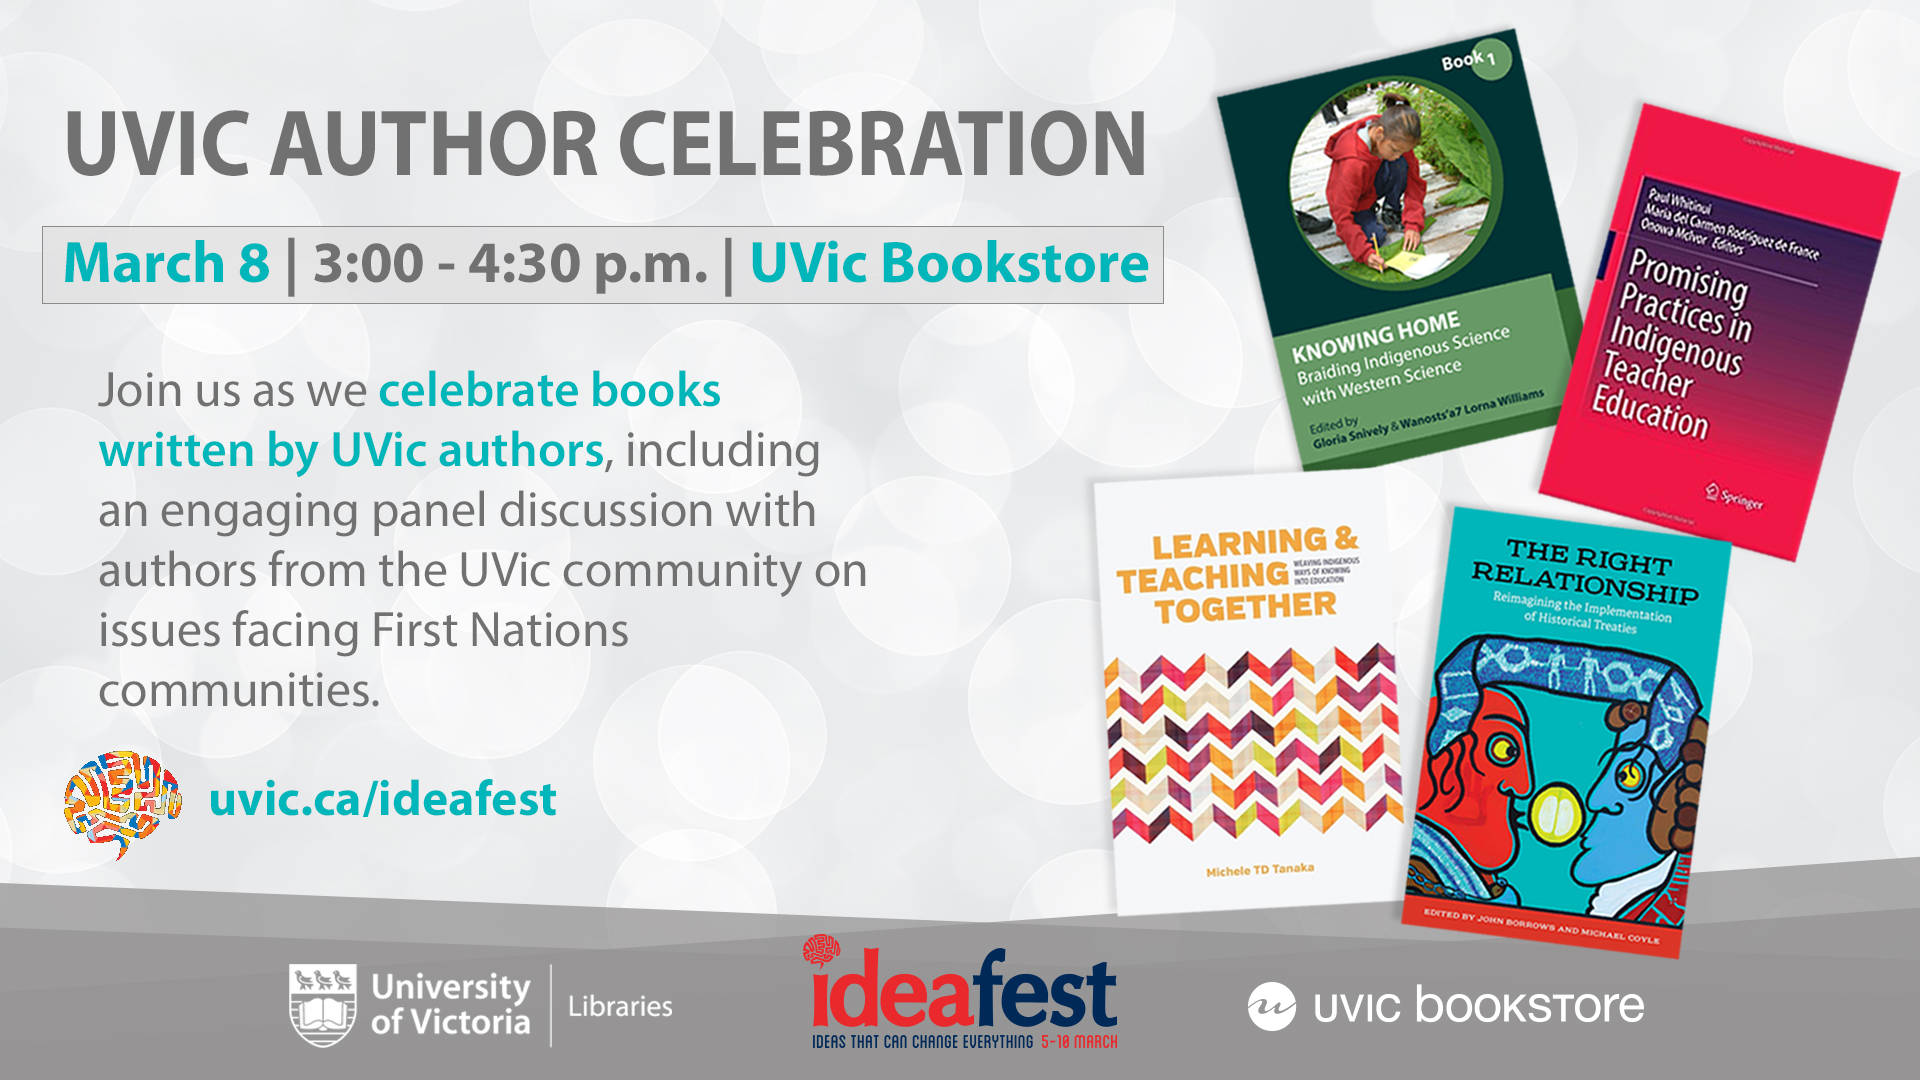 UVic Author Celebration Feature: The Right Relationship